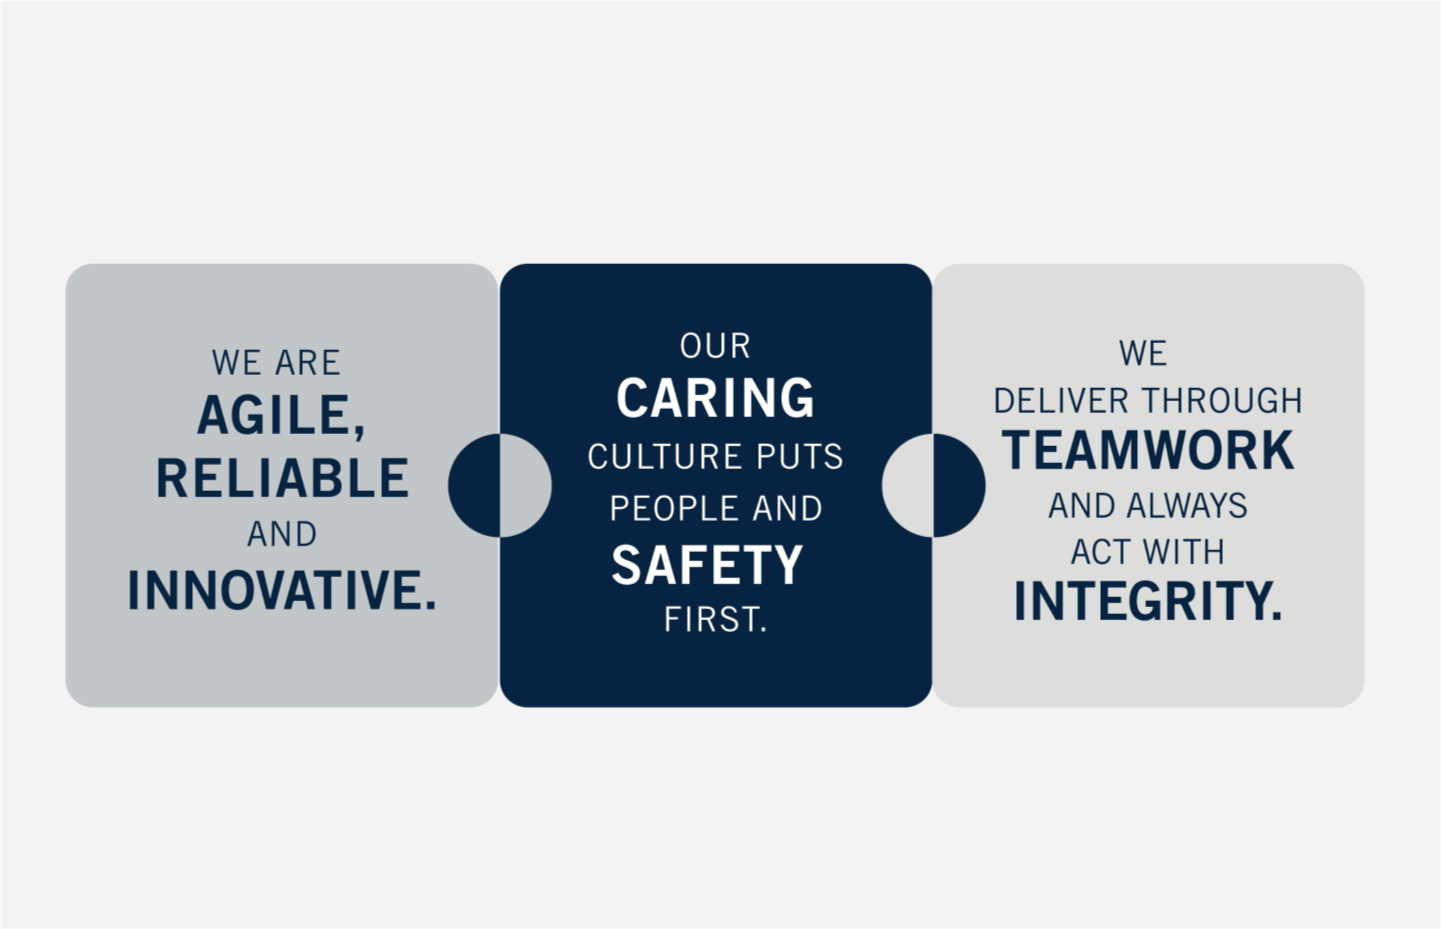 AUS values are We are agile, reliable and innovative, our caring culture puts people and safety first, and we deliver through teamwork and always act with integrity